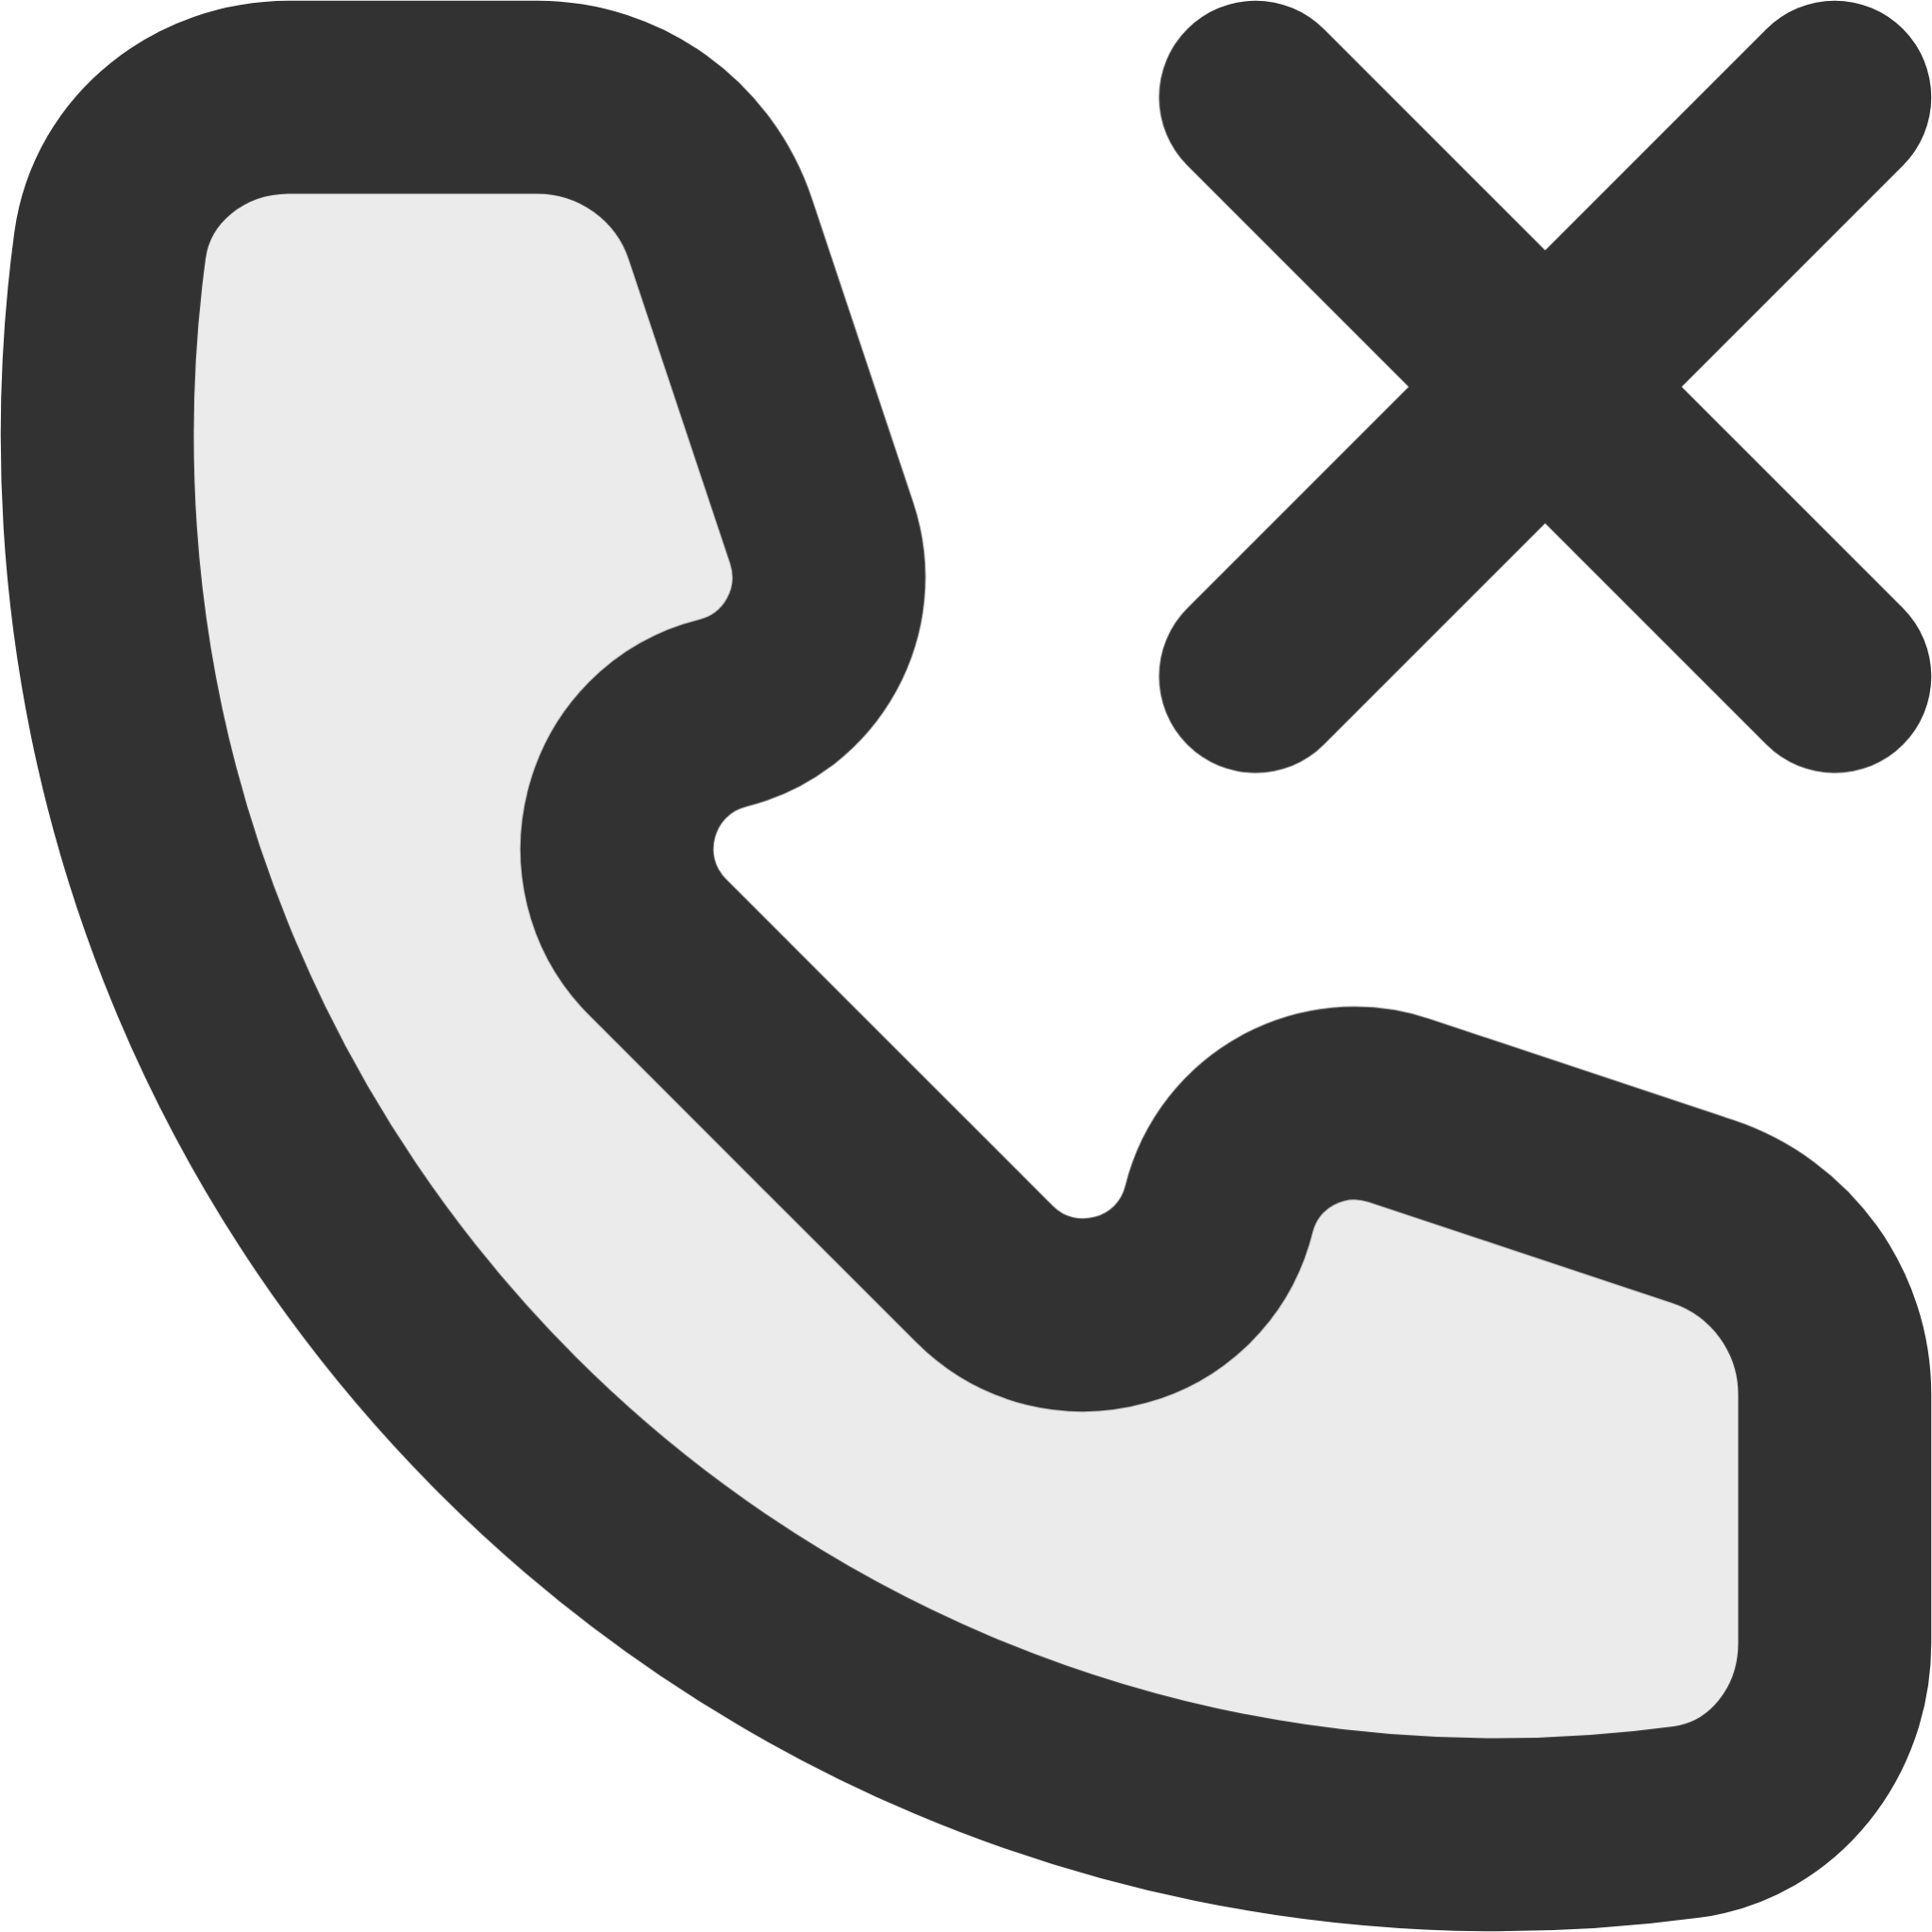 phone missed call icon